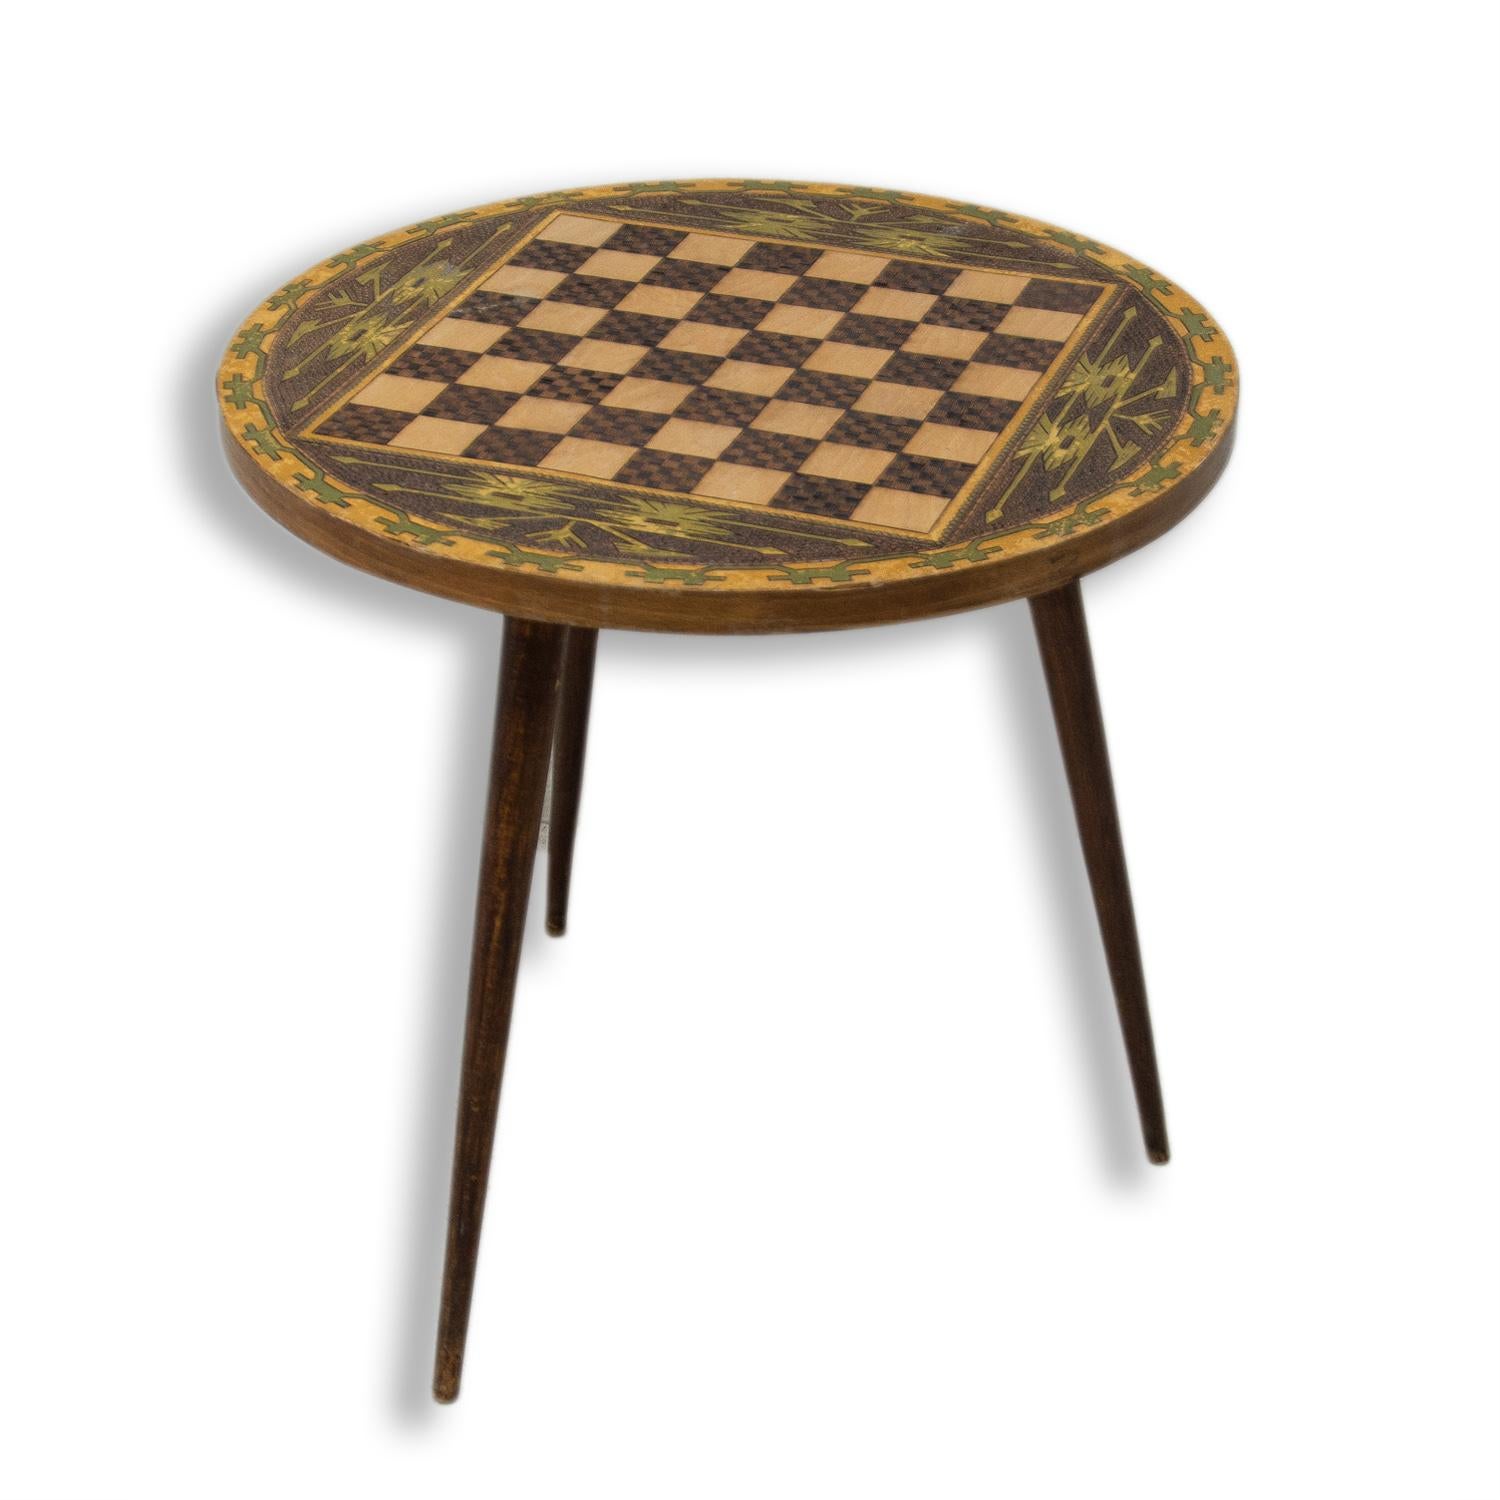 Scandinavian Modern Vintage Round Side Table with Chess Pattern, 1970s, Albania